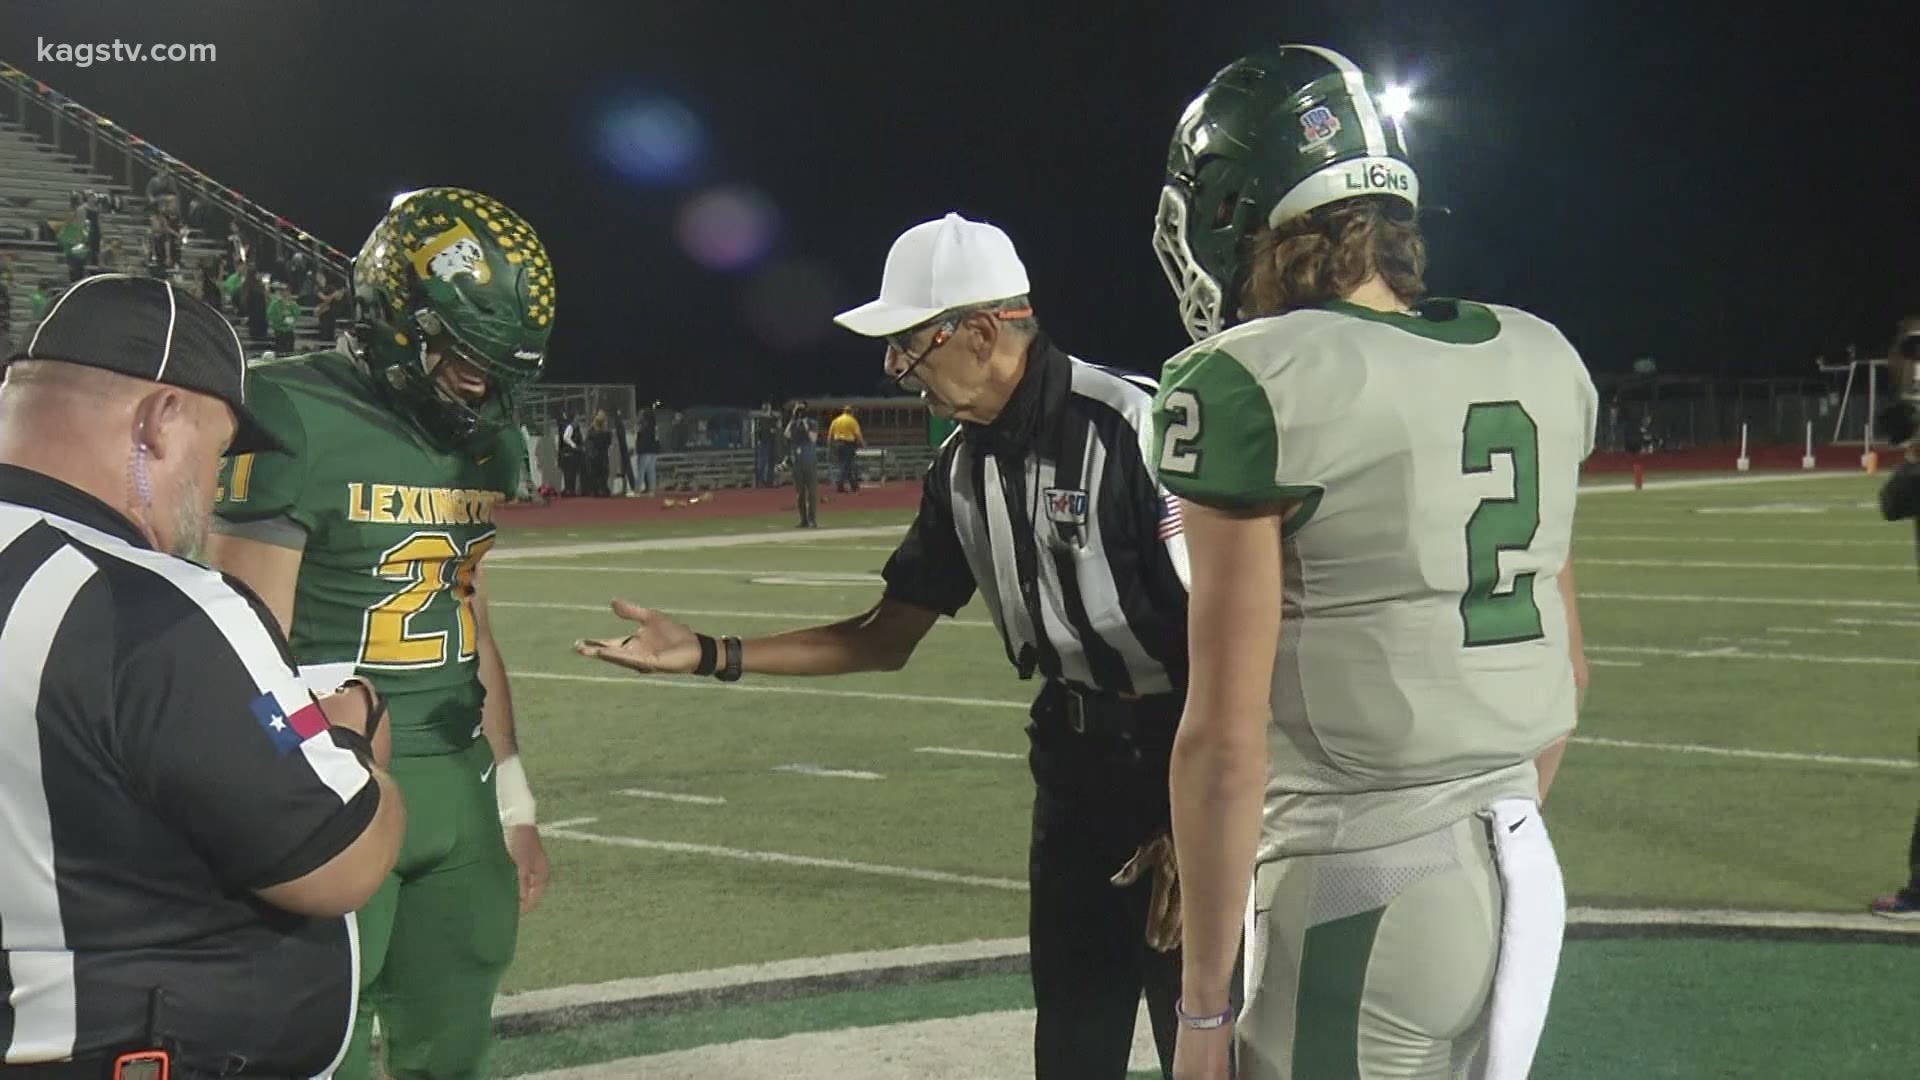 Here are the regional quarterfinal highlights of our Brazos Valley teams in action.